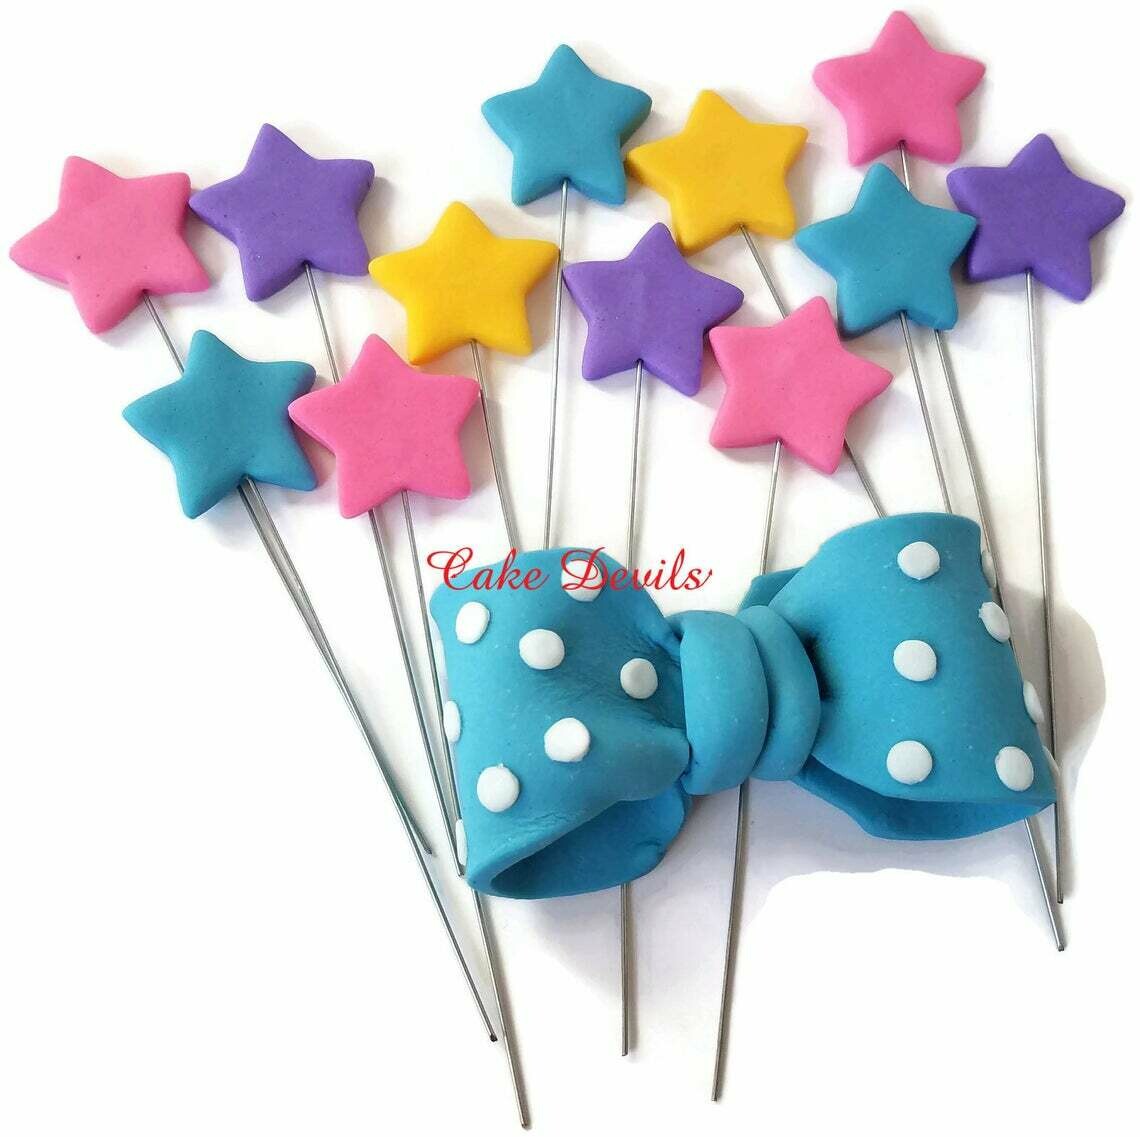 Exploding Fondant Stars or Hearts Cake Toppers, Star Cake Decorations, Heart Cake Decorations, handmade edible